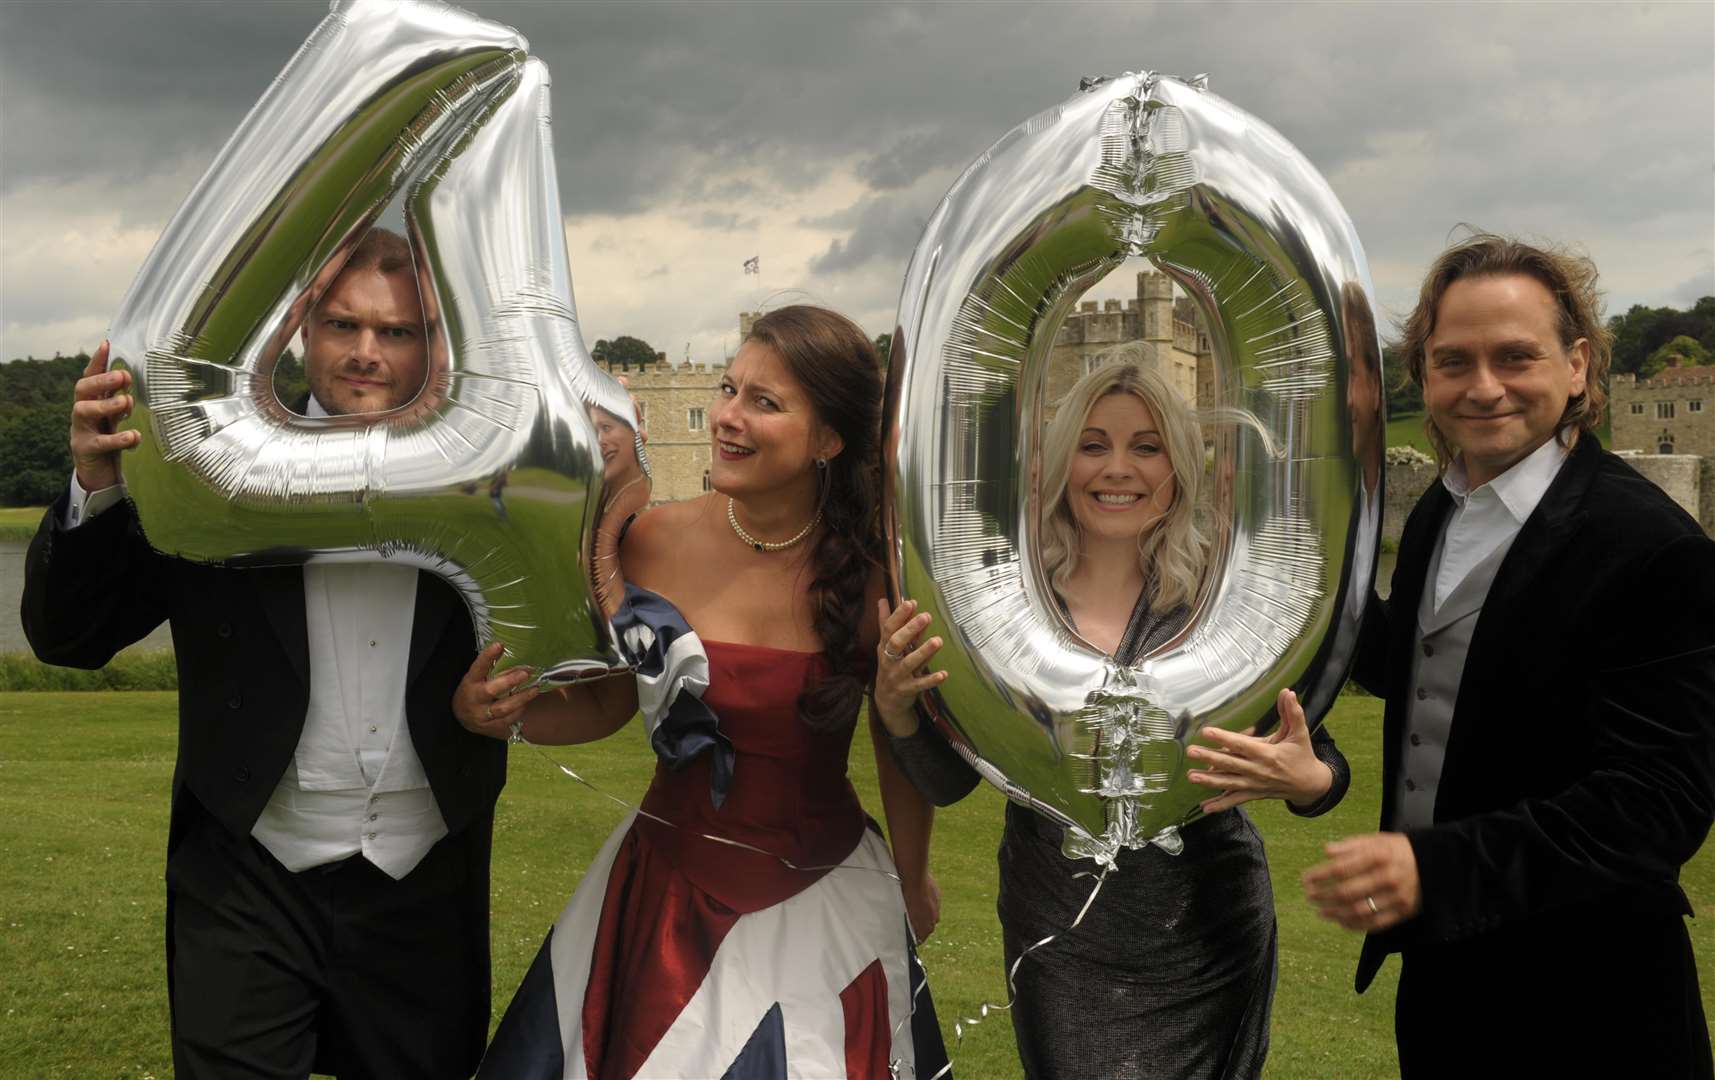 Soloists Alexander James-Edwards, Katie Bird, Louise Dearman and Tim Howar anticipate the Classical Concert's 40th birthday